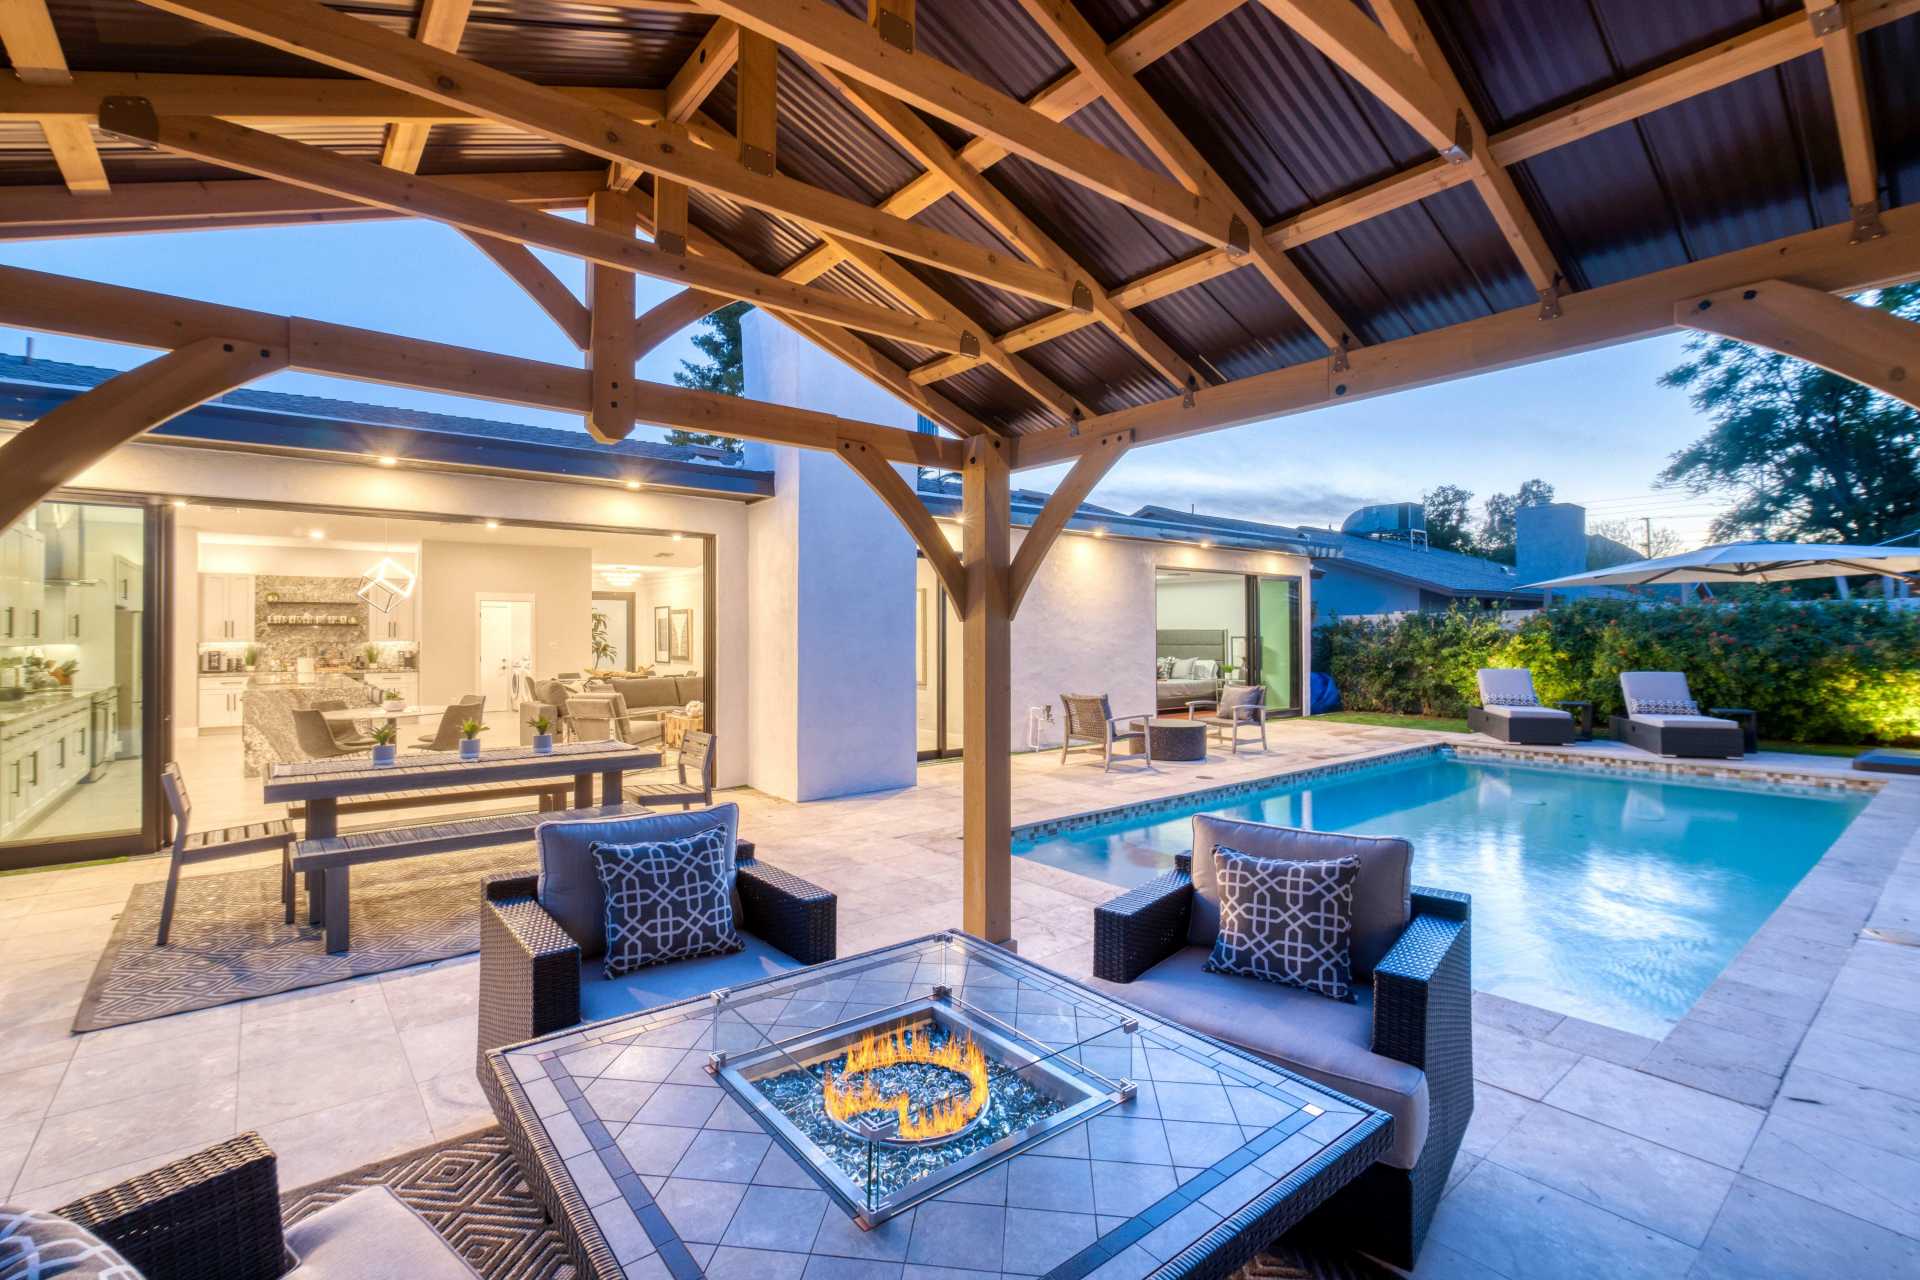 luxurious patio vacation scene with outdoor dining table and pool